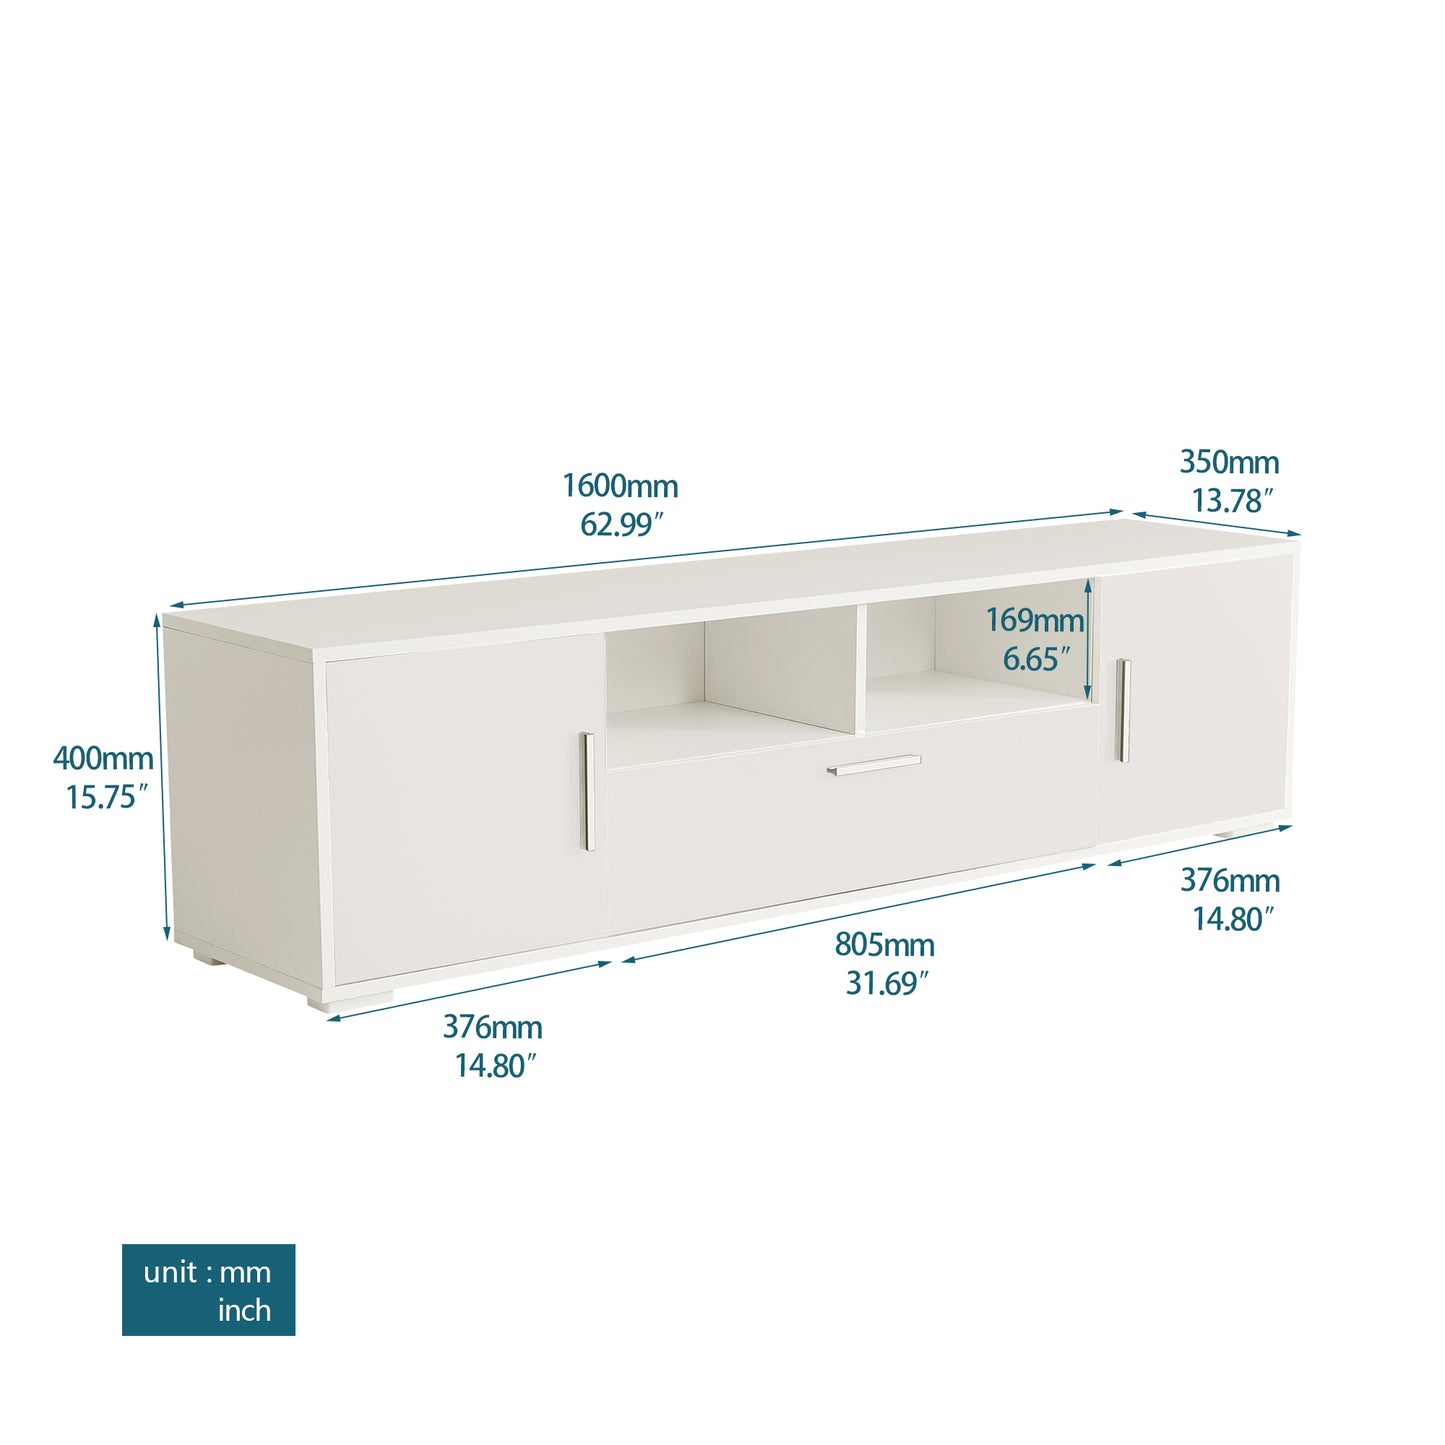 QUICK ASSEMBLE WHITE modern TV Stand, only 20 minutes to finish assemble, with LED Lights, high glossy front TV Cabinet, can be assembled in Lounge Room, Living Room or Bedroom, color:WHITE